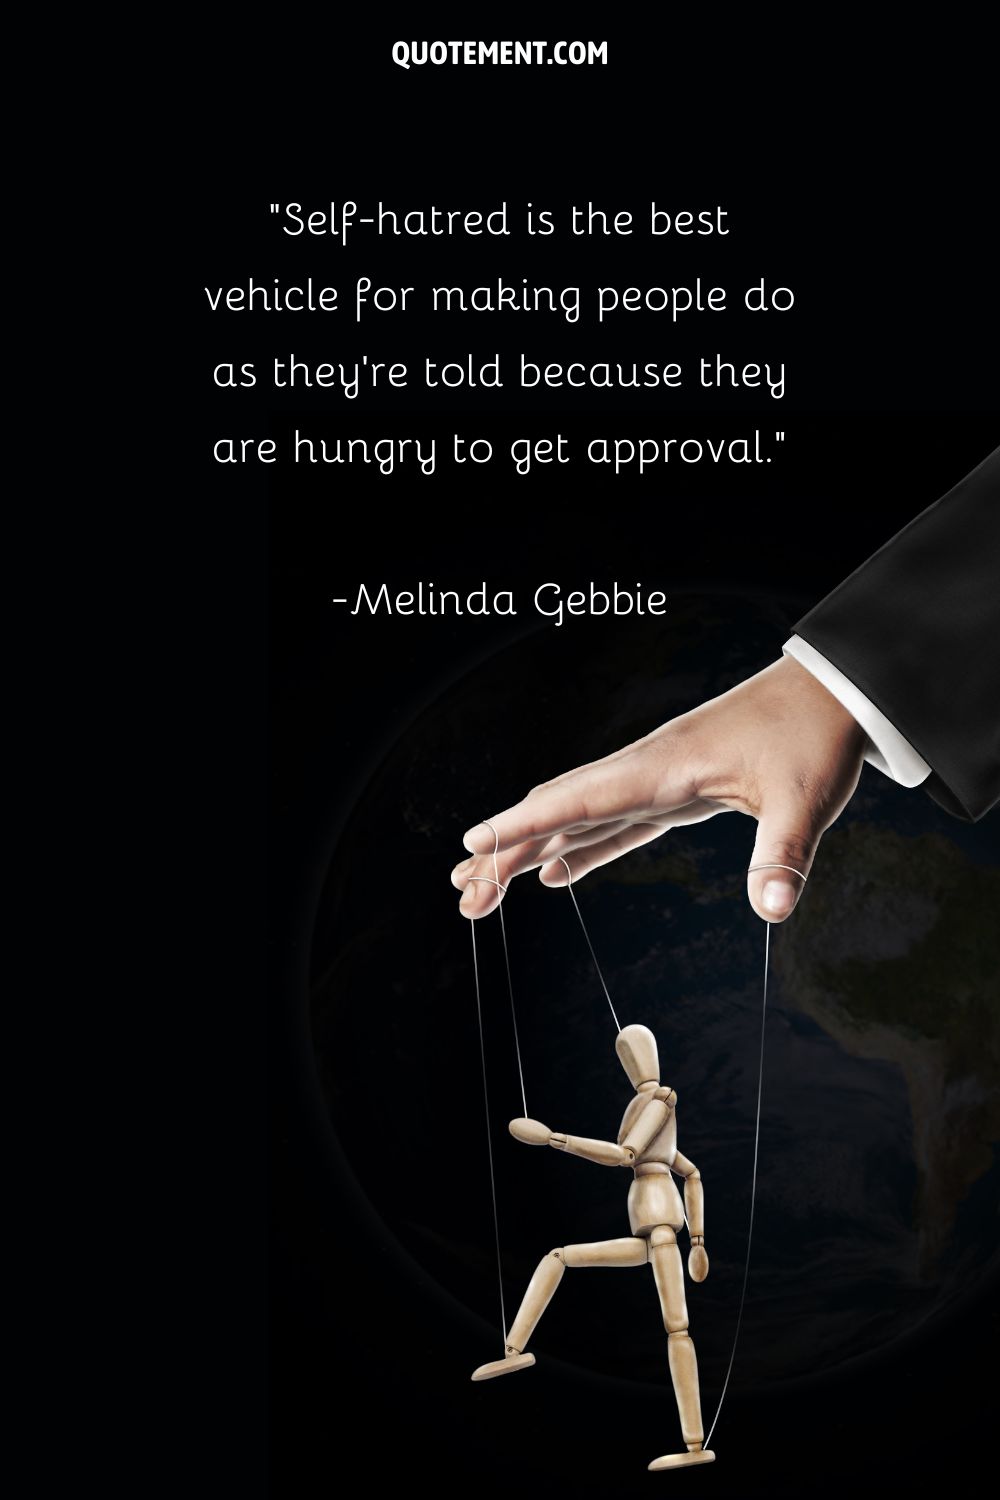 image of a marionette representing quote on self-hatred and manipulation